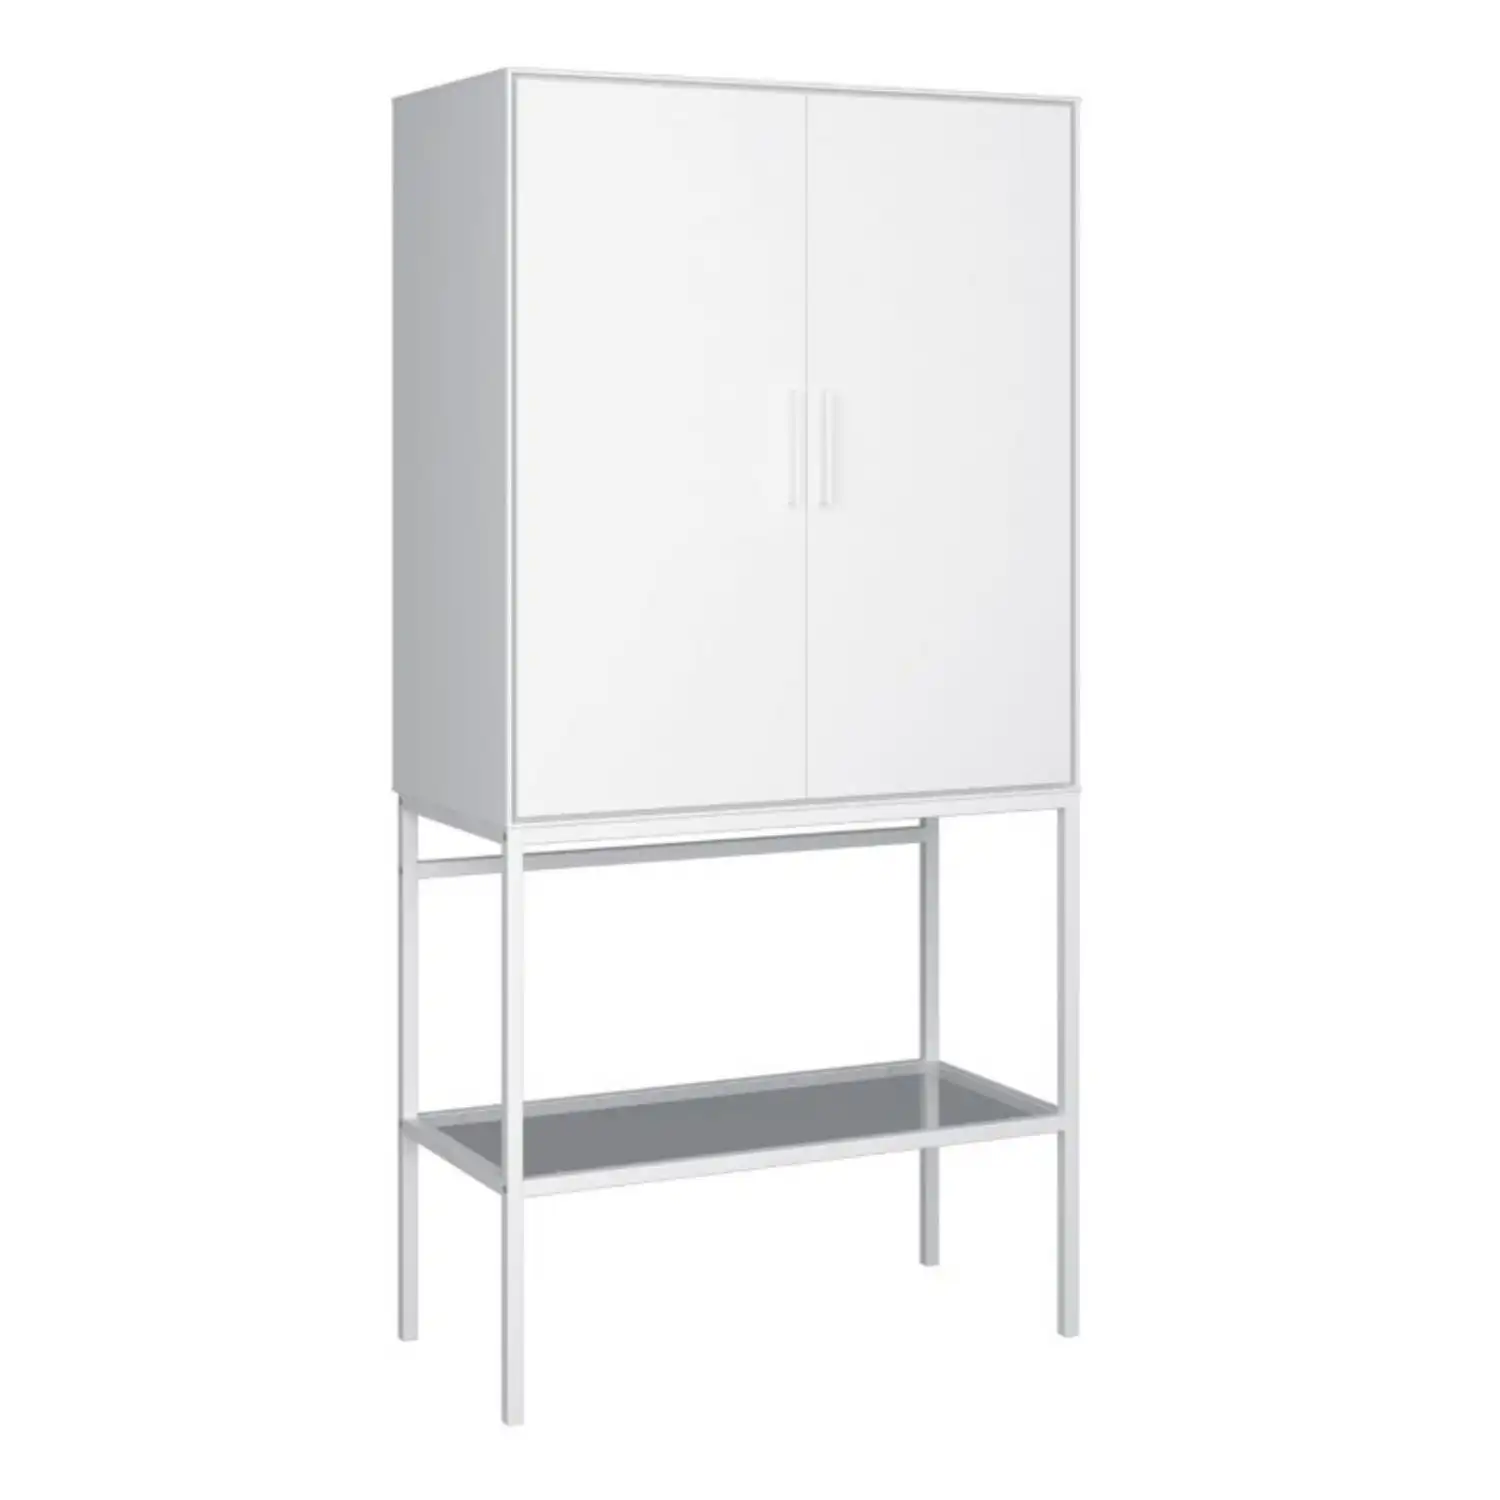 2 Door Tall Cabinet in Pure White with Steel White Legs